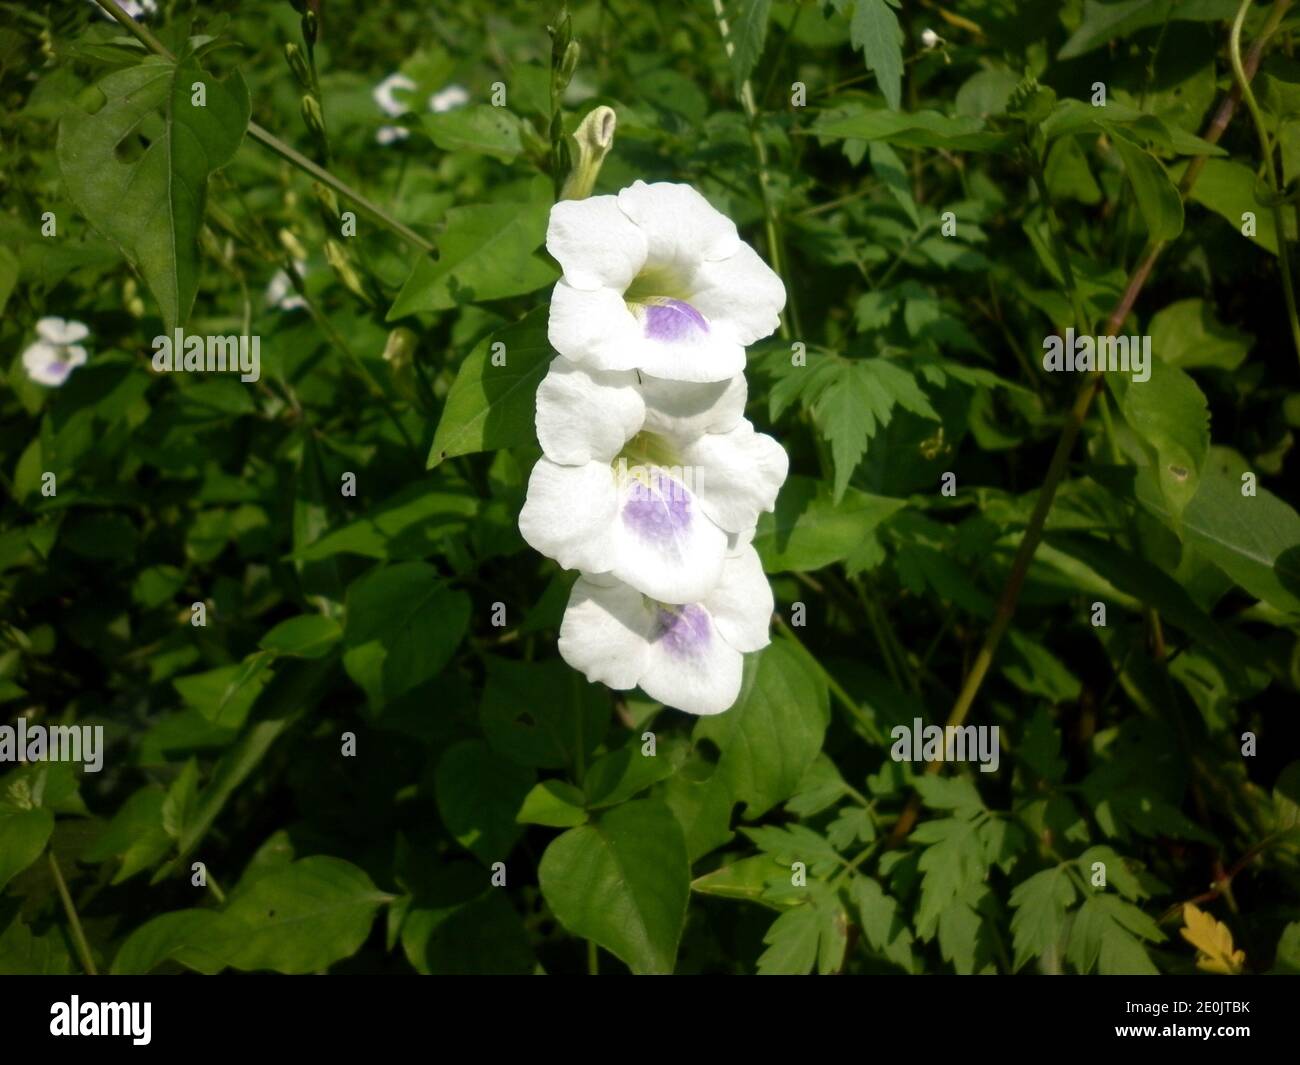 White and light purple mixed three rare wild flower top on each other Stock Photo